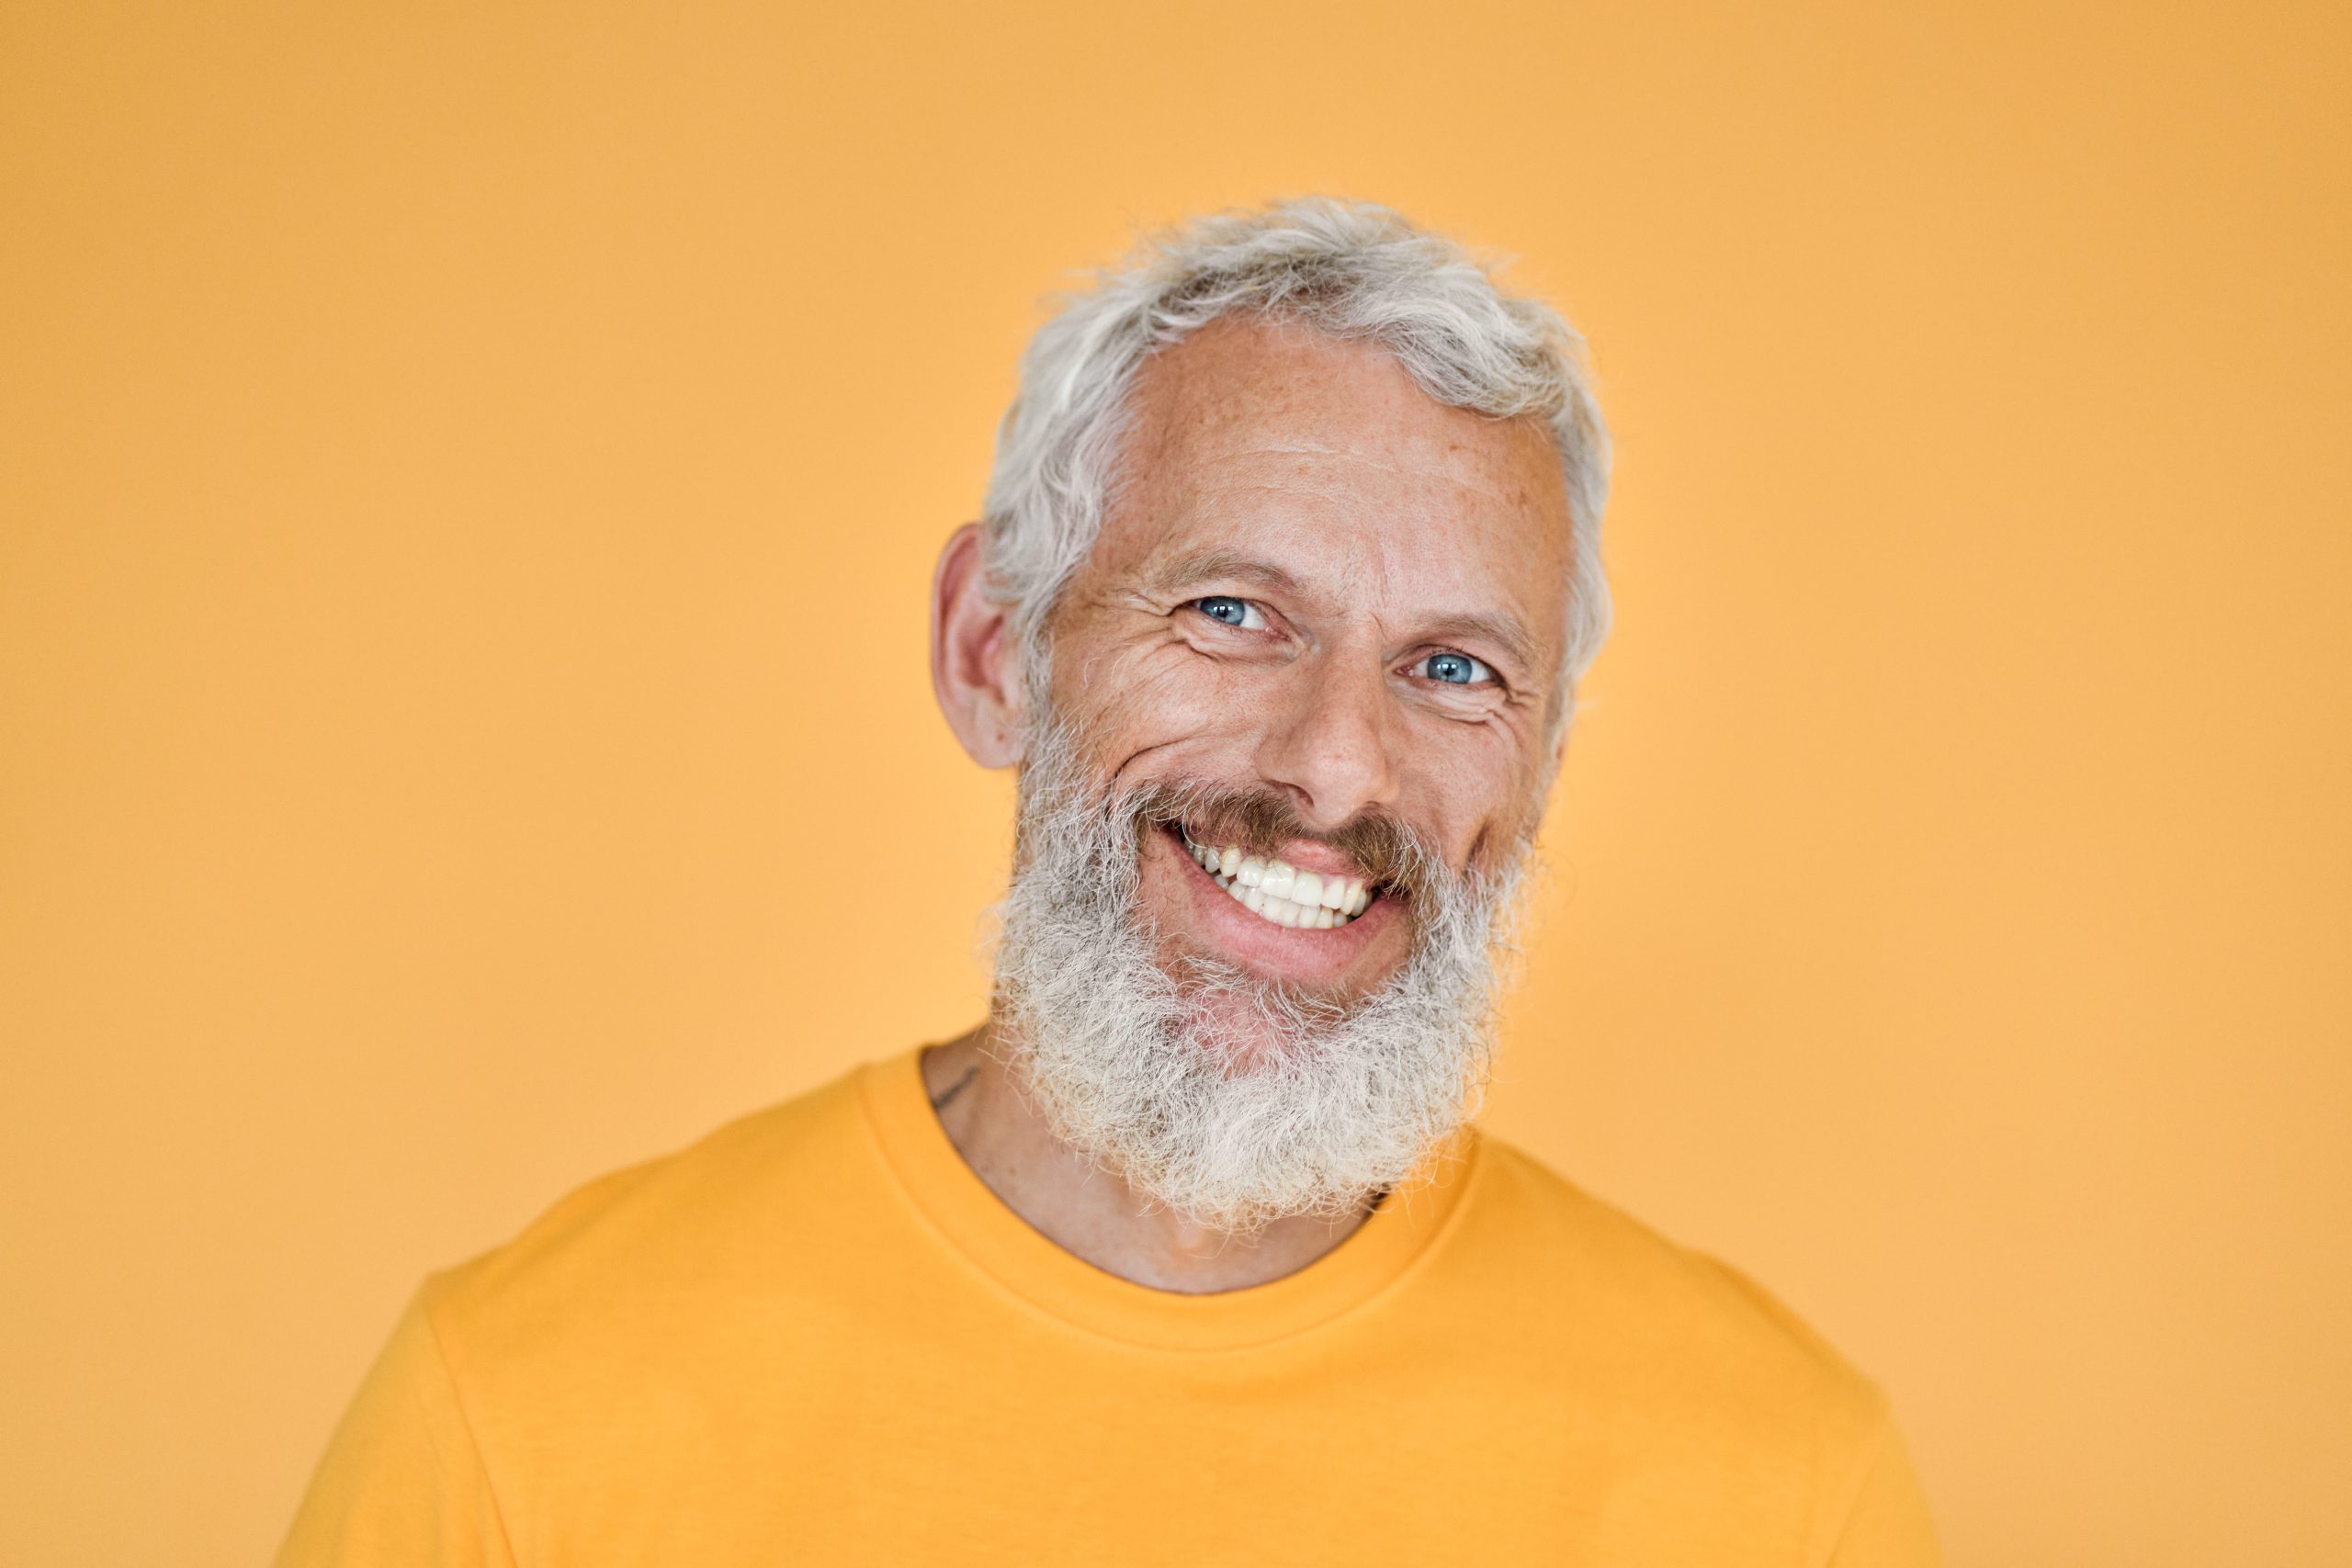 mature man who has completed dental implant therapy smiles at the camera on a yellow background